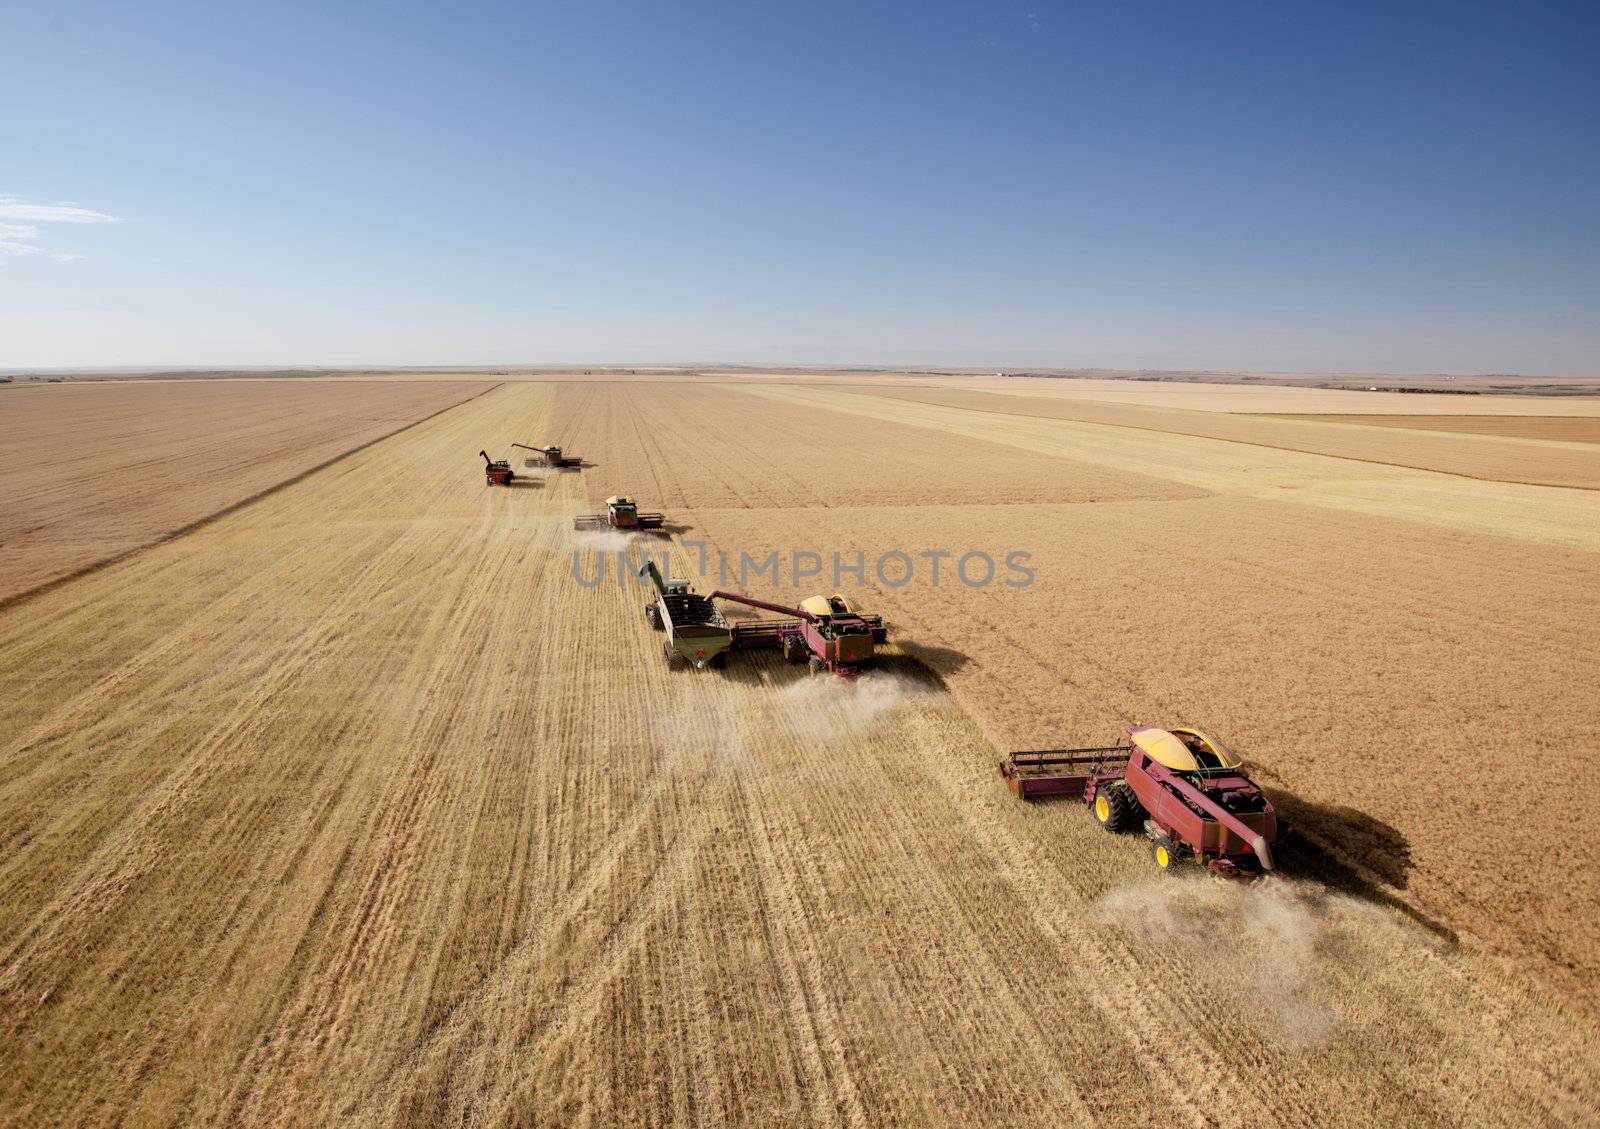 Four harvesters combining in formation in a field on the open prairie